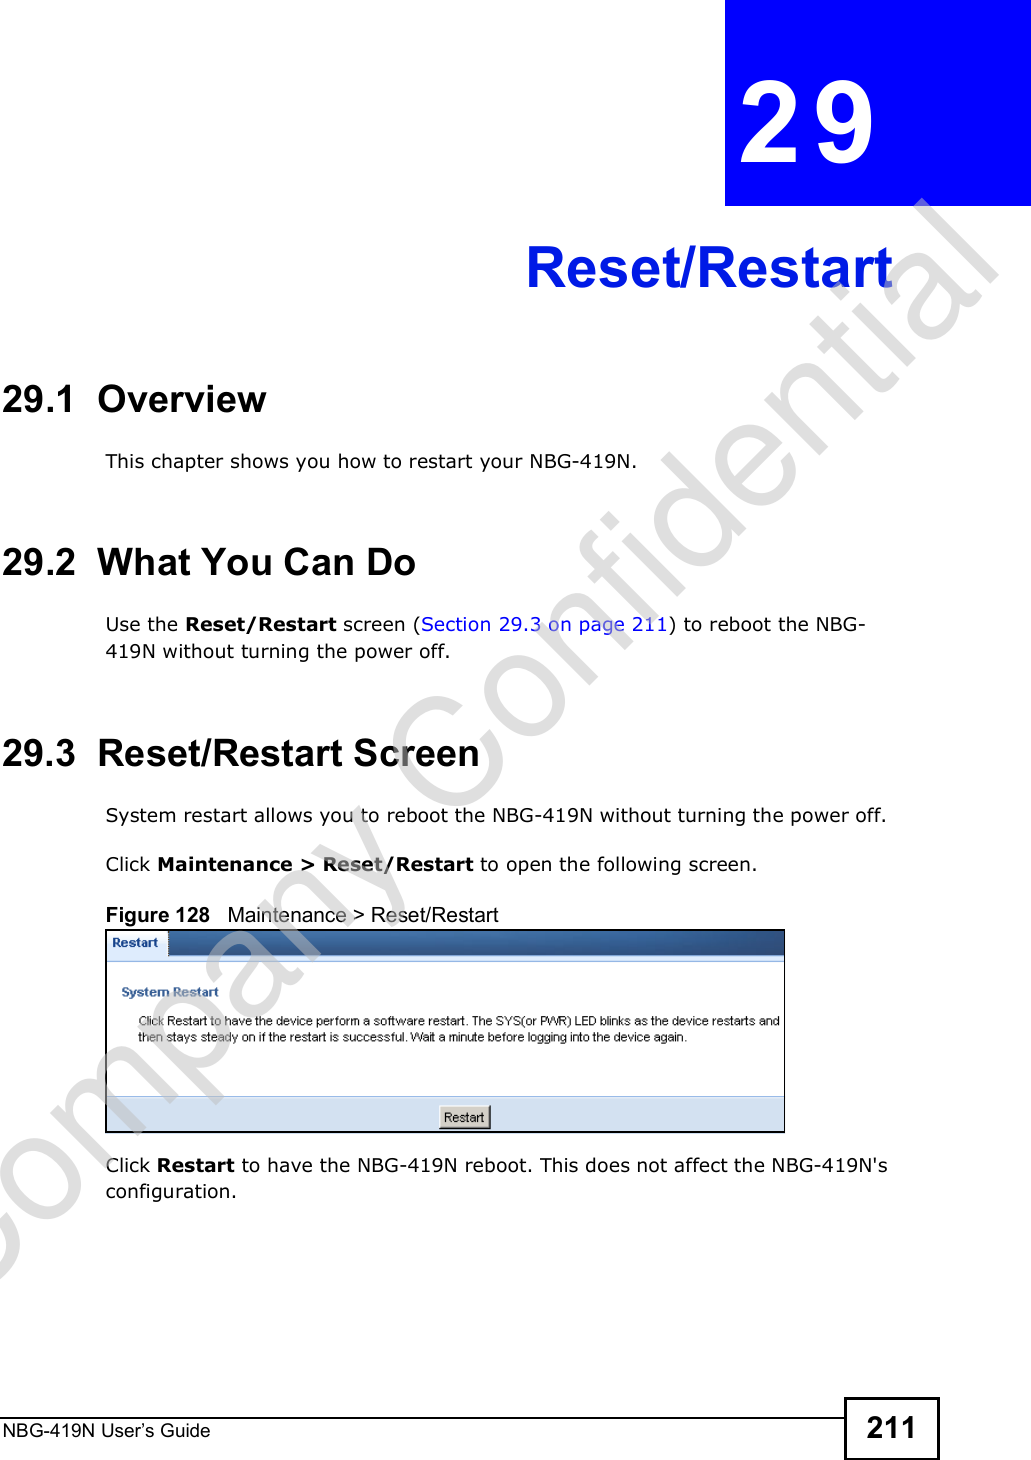 NBG-419N User s Guide 211CHAPTER  29 Reset/Restart29.1  OverviewThis chapter shows you how to restart your NBG-419N.29.2  What You Can DoUse the Reset/Restart screen (Section 29.3 on page 211) to reboot the NBG-419N without turning the power off.29.3  Reset/Restart ScreenSystem restart allows you to reboot the NBG-419N without turning the power off. Click Maintenance &gt; Reset/Restart to open the following screen. Figure 128   Maintenance &gt; Reset/RestartClick Restart to have the NBG-419N reboot. This does not affect the NBG-419N&apos;s configuration.Company Confidential